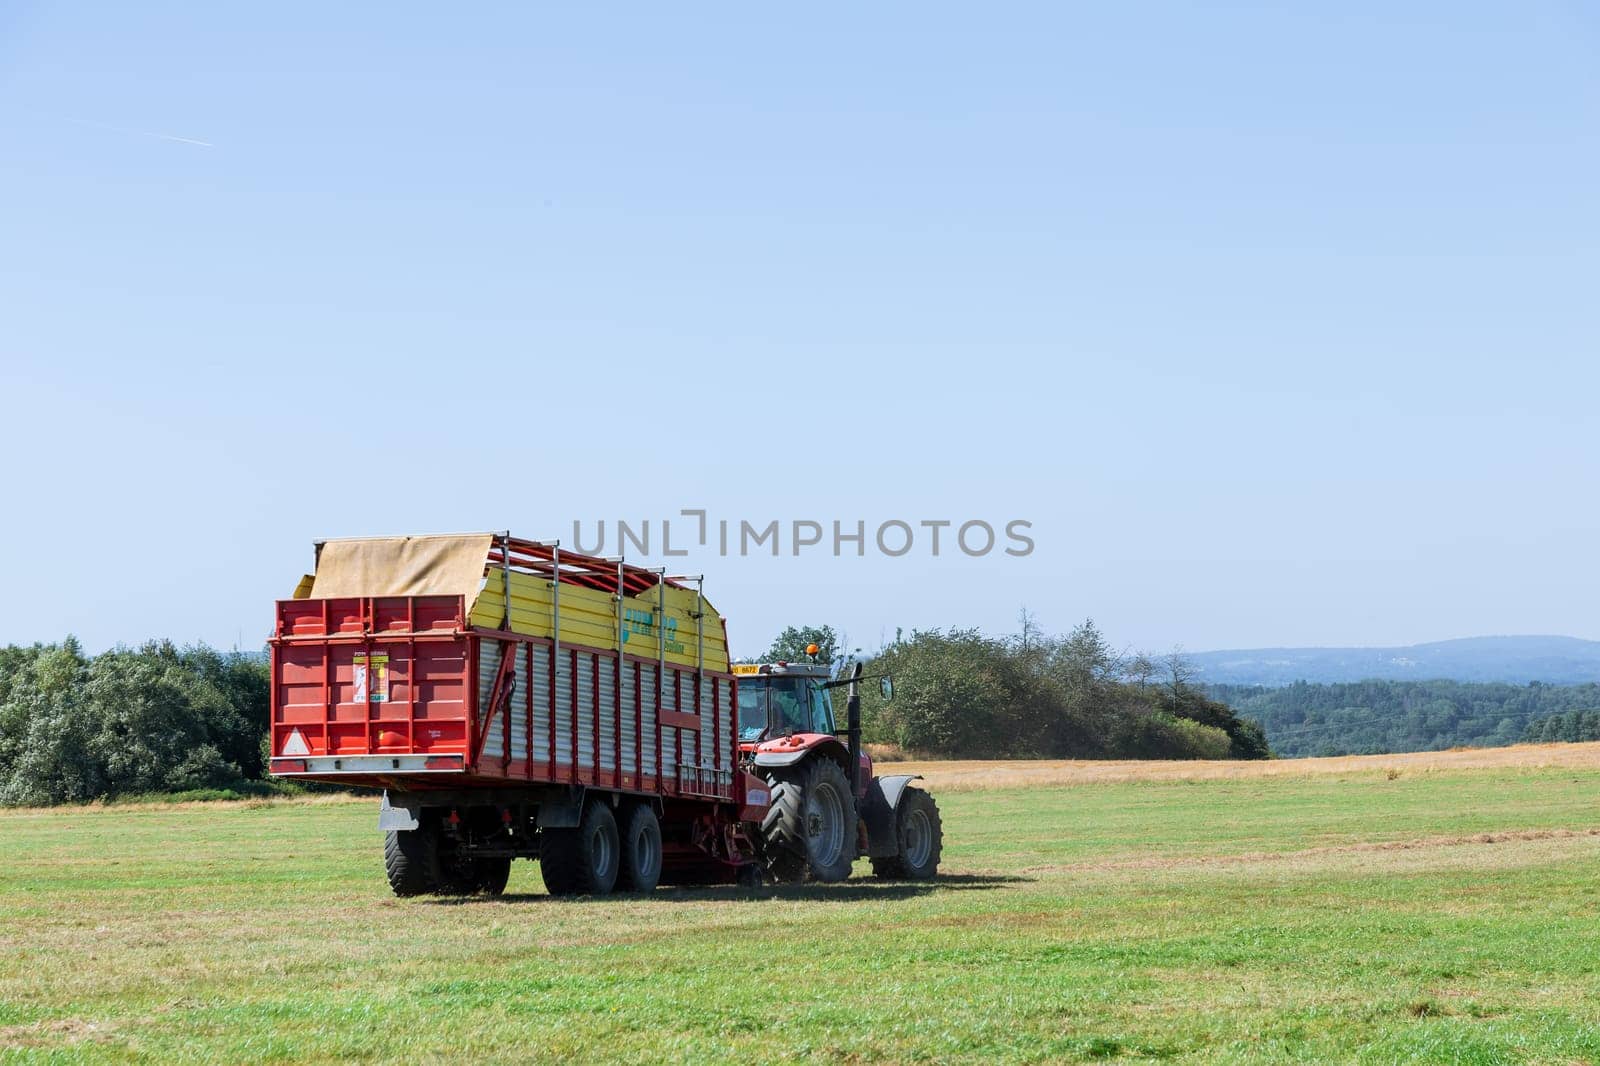 Hay tractor with trailer is working in field. Modern hay harvesting equipment.